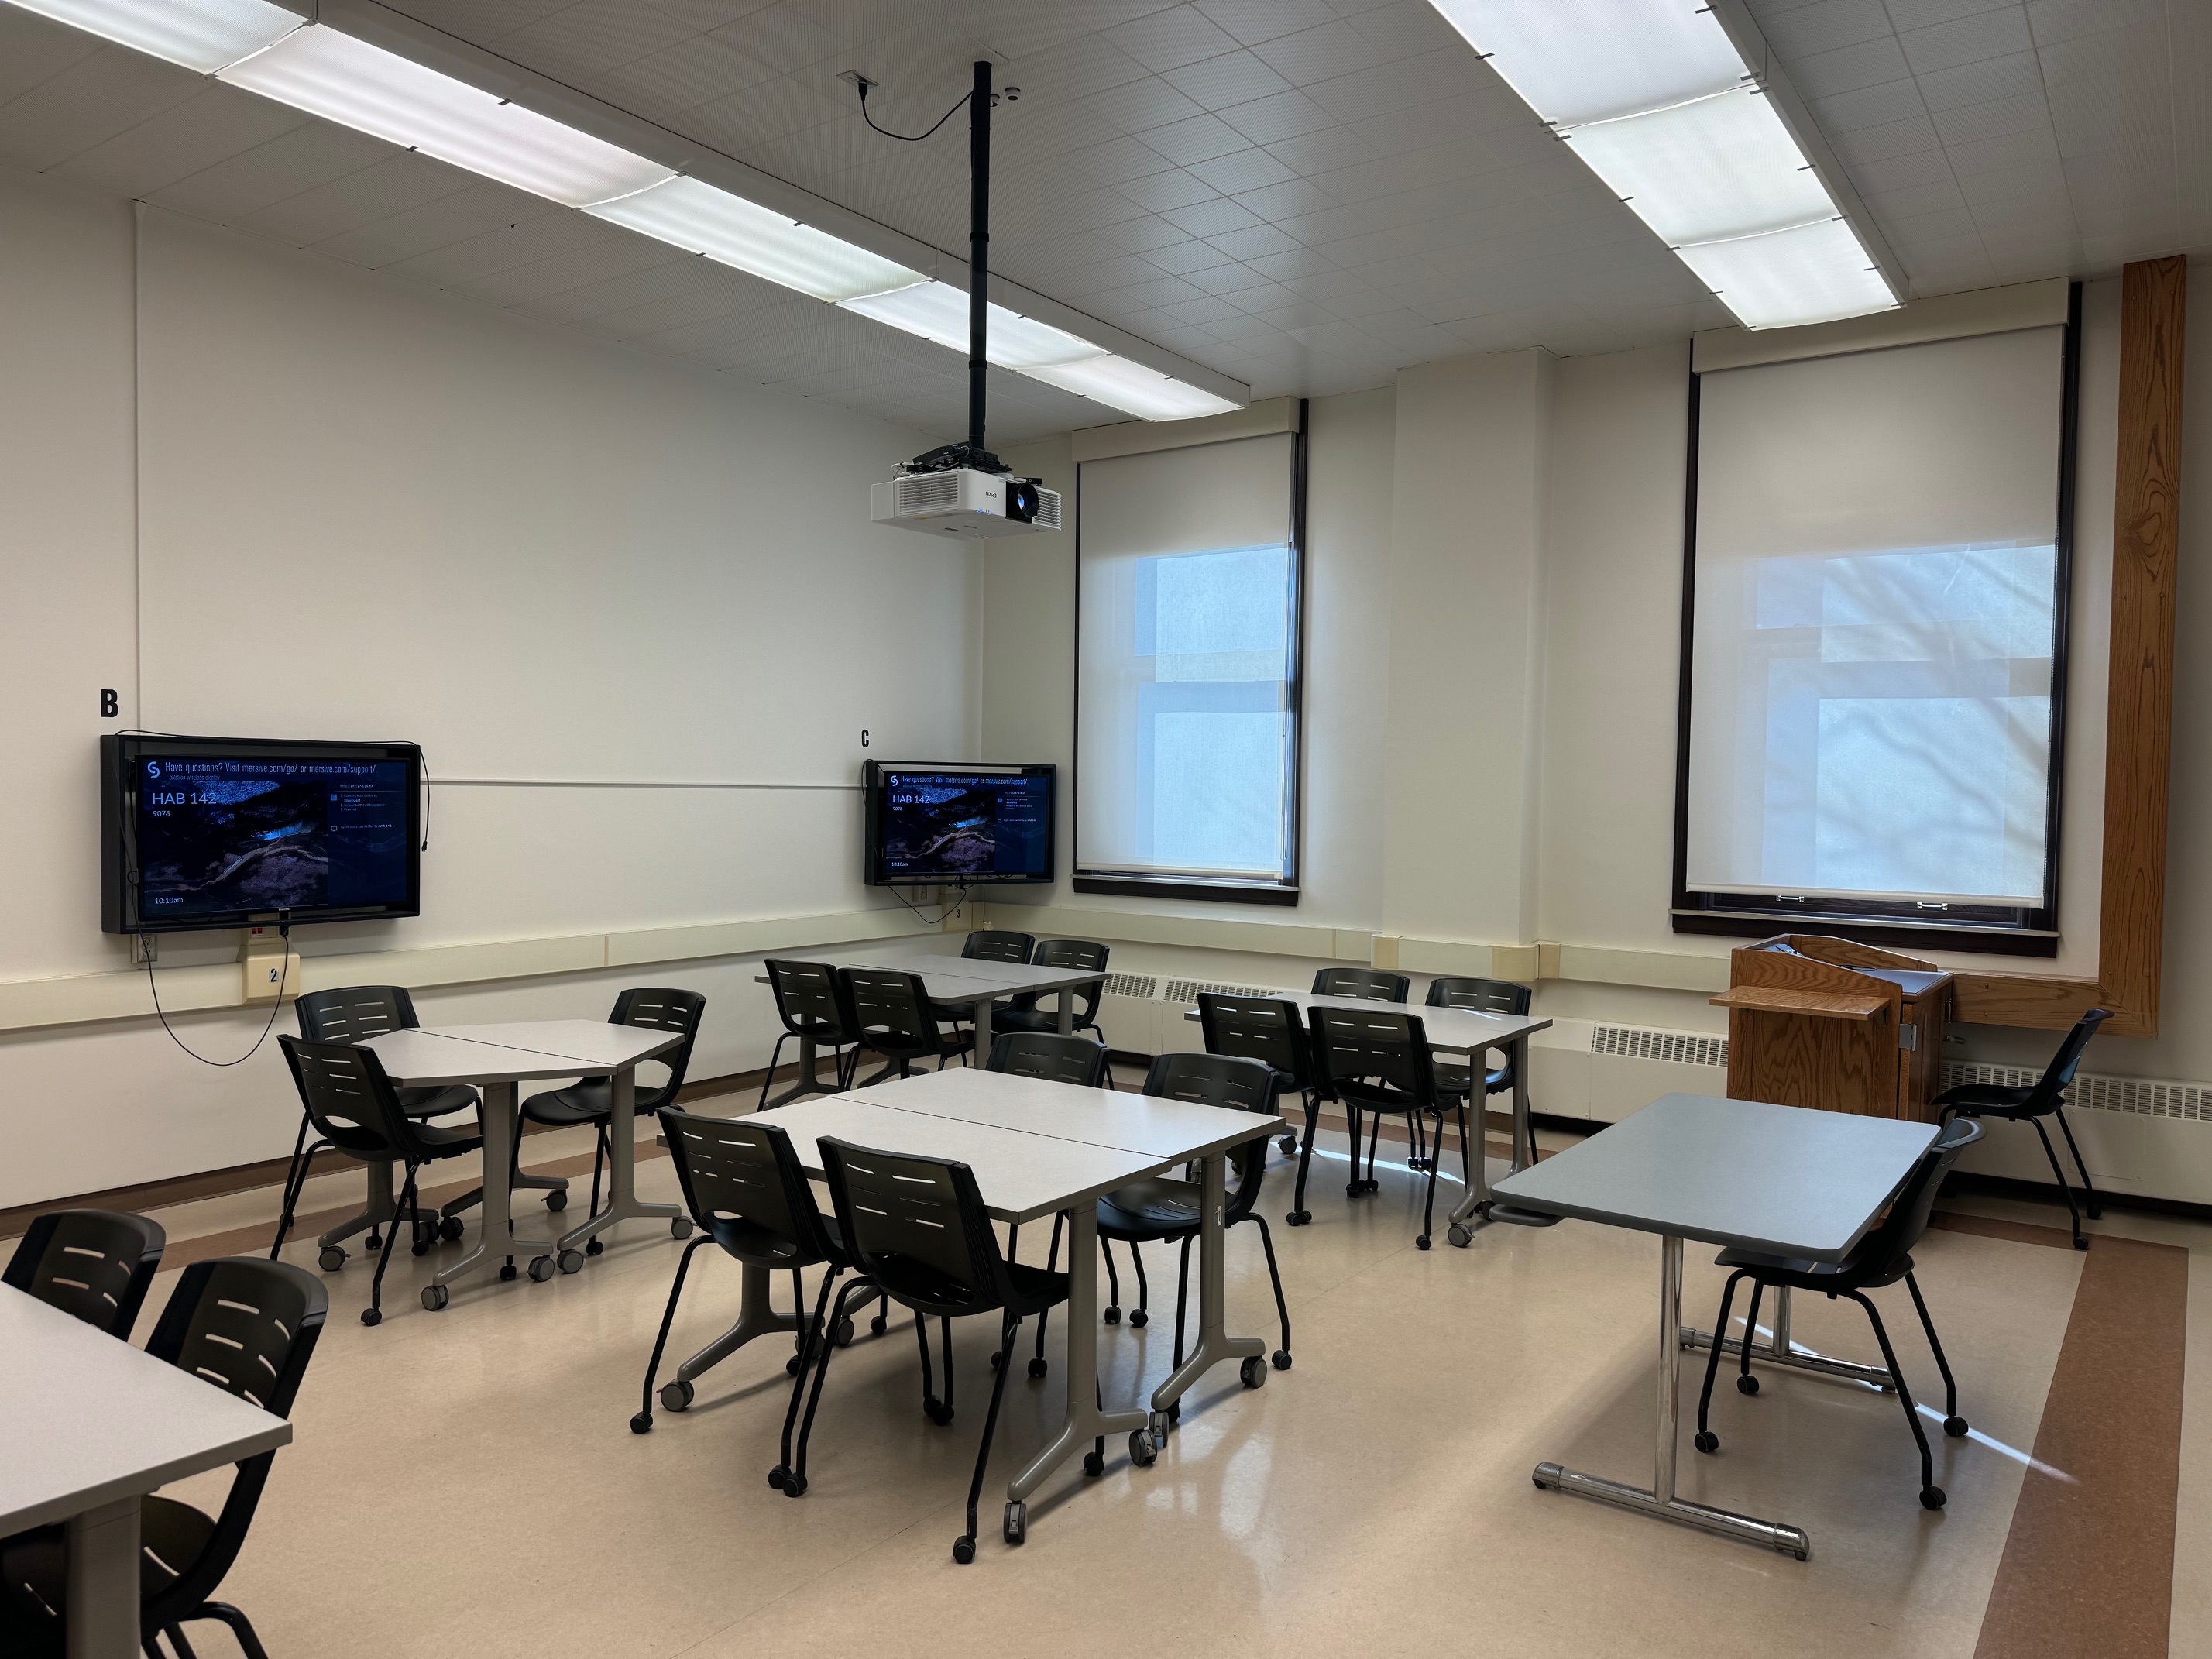 A view of the classroom with movable tables and chairs, tv monitors, and instructor table in front.